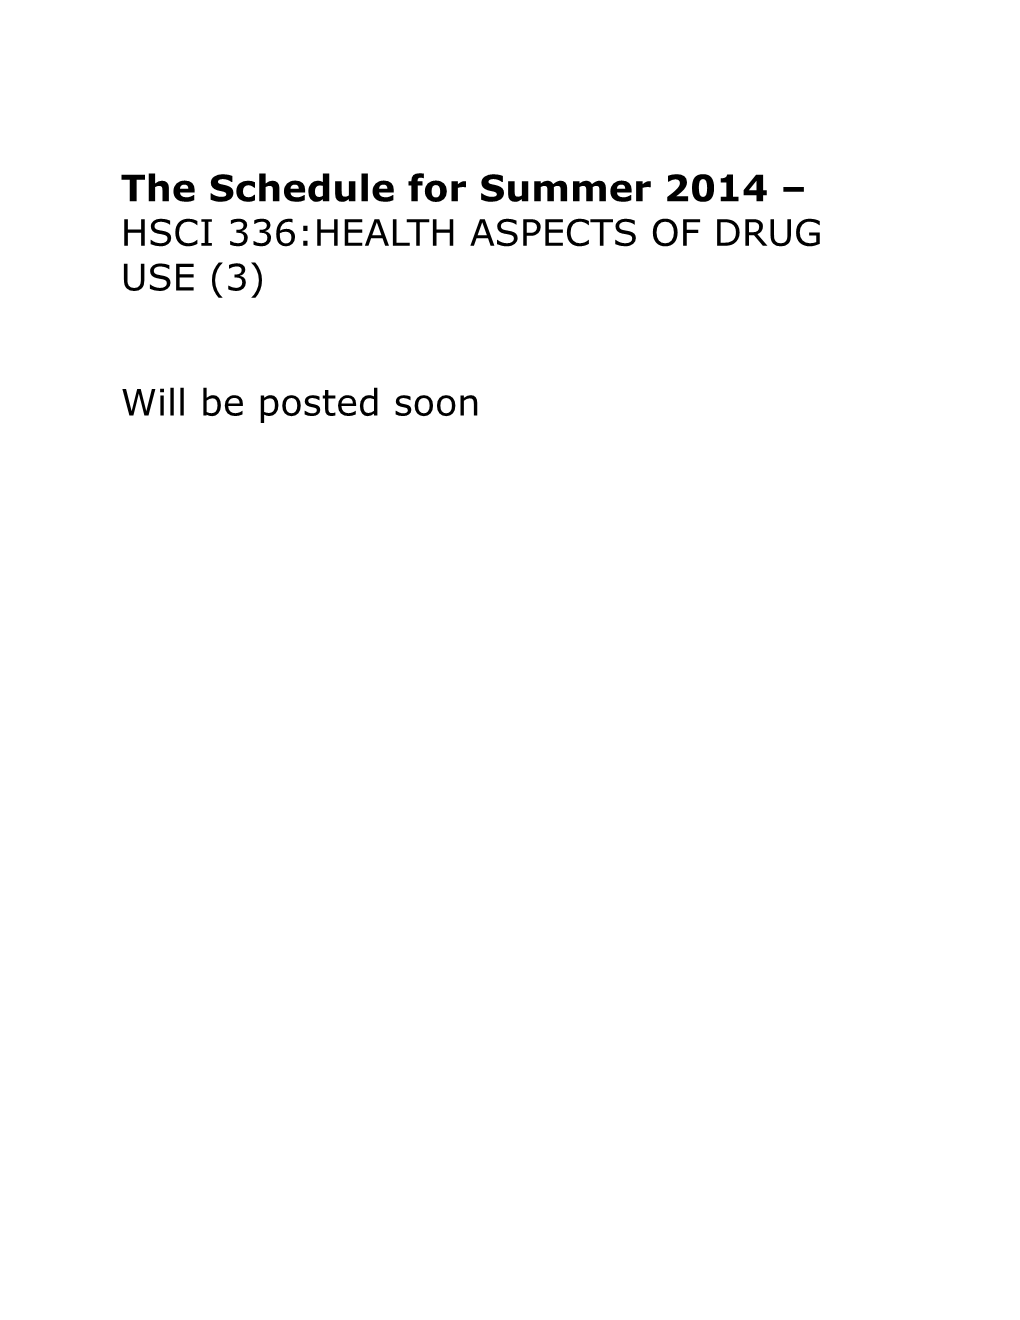 The Schedule for Summer 2014 HSCI 336:HEALTH ASPECTS of DRUG USE (3)